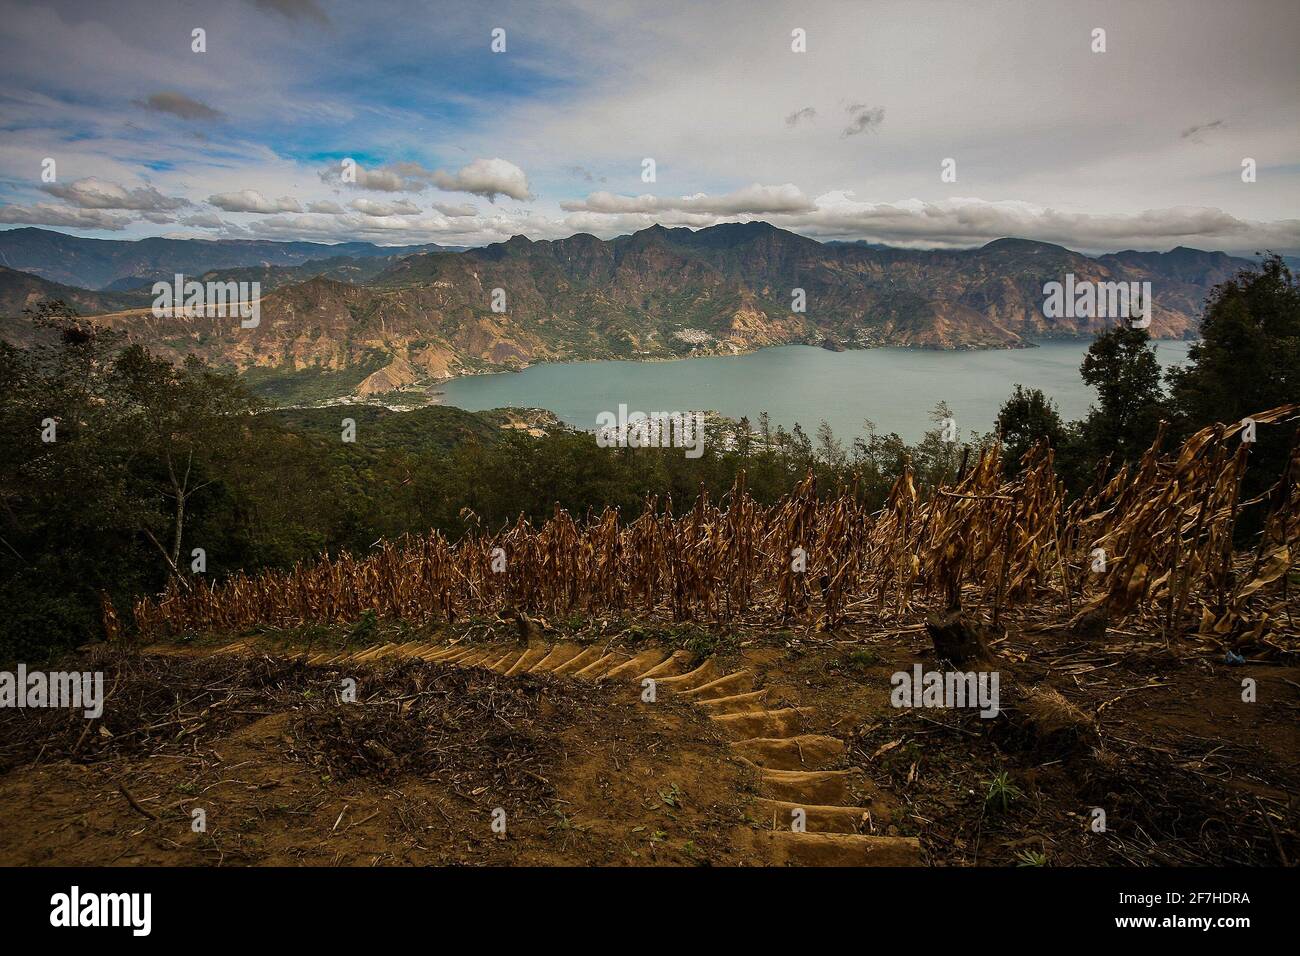 Panorama of Lago de Atitlan or Atitlan lake as seen from descending from the San Pedro volcano. Villages of San Pedro and Panajachel are seen. Stock Photo